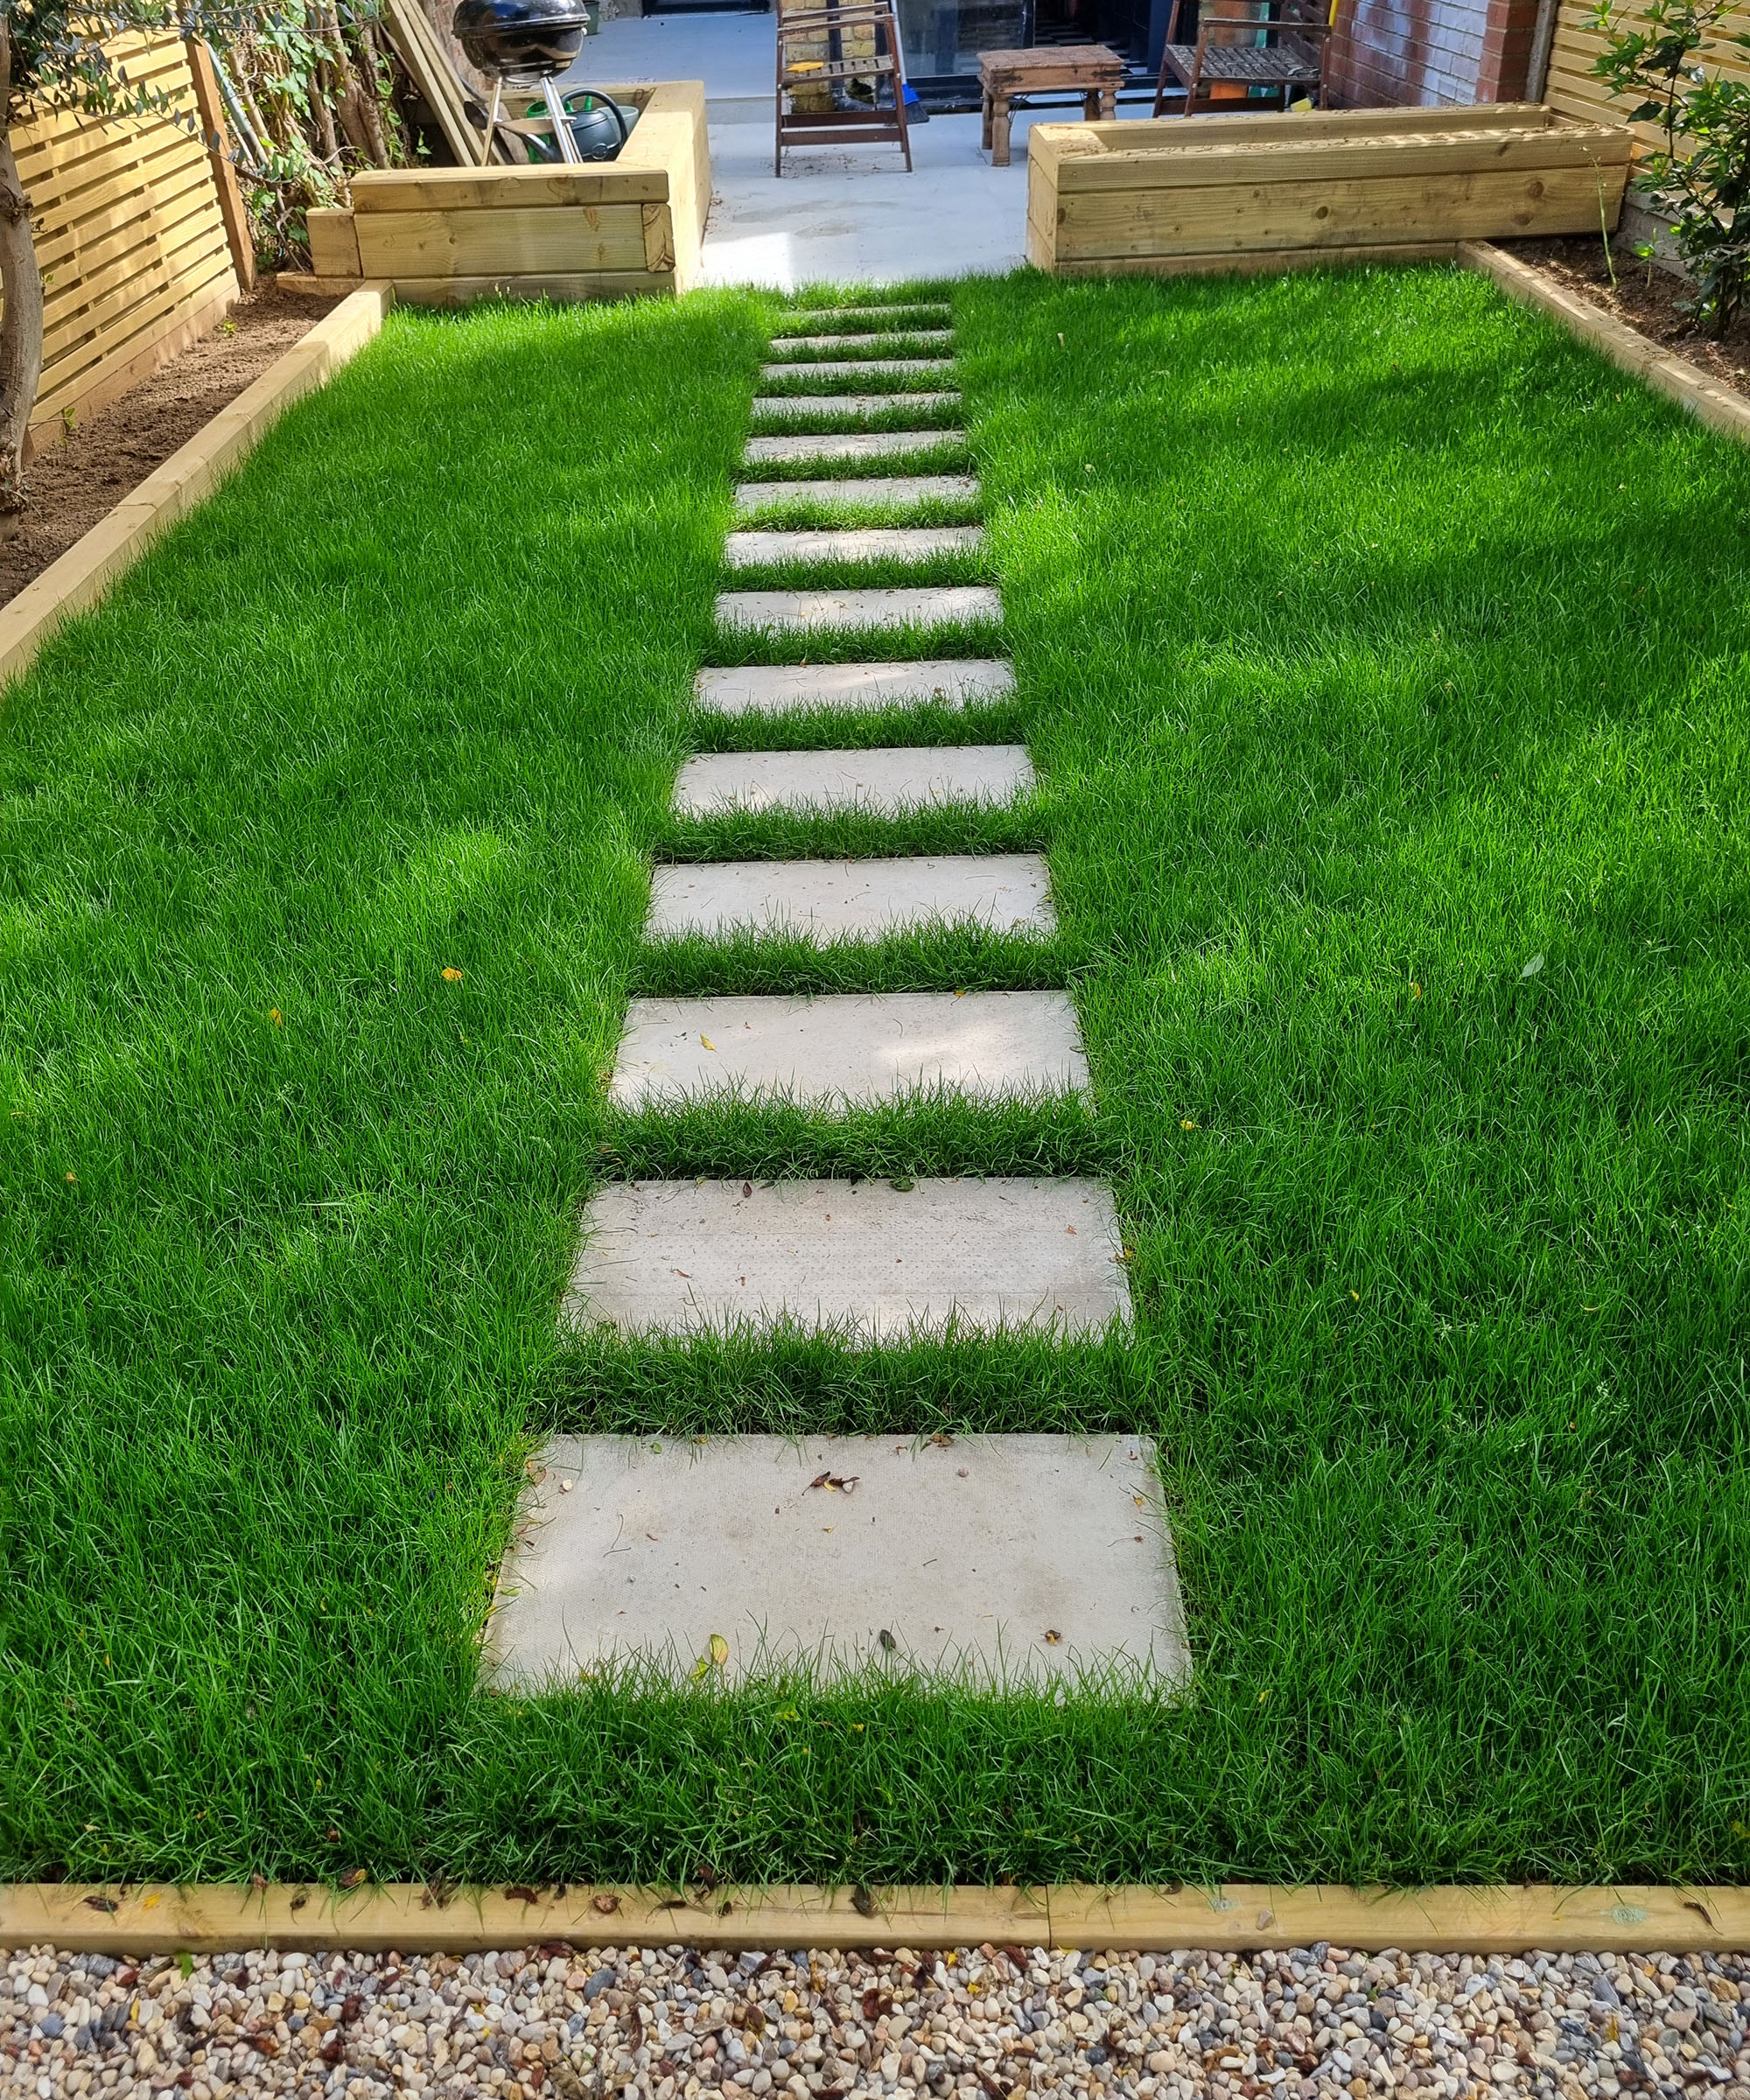 A stone path with rectangular slabs set into a lawn at 10cm intervals